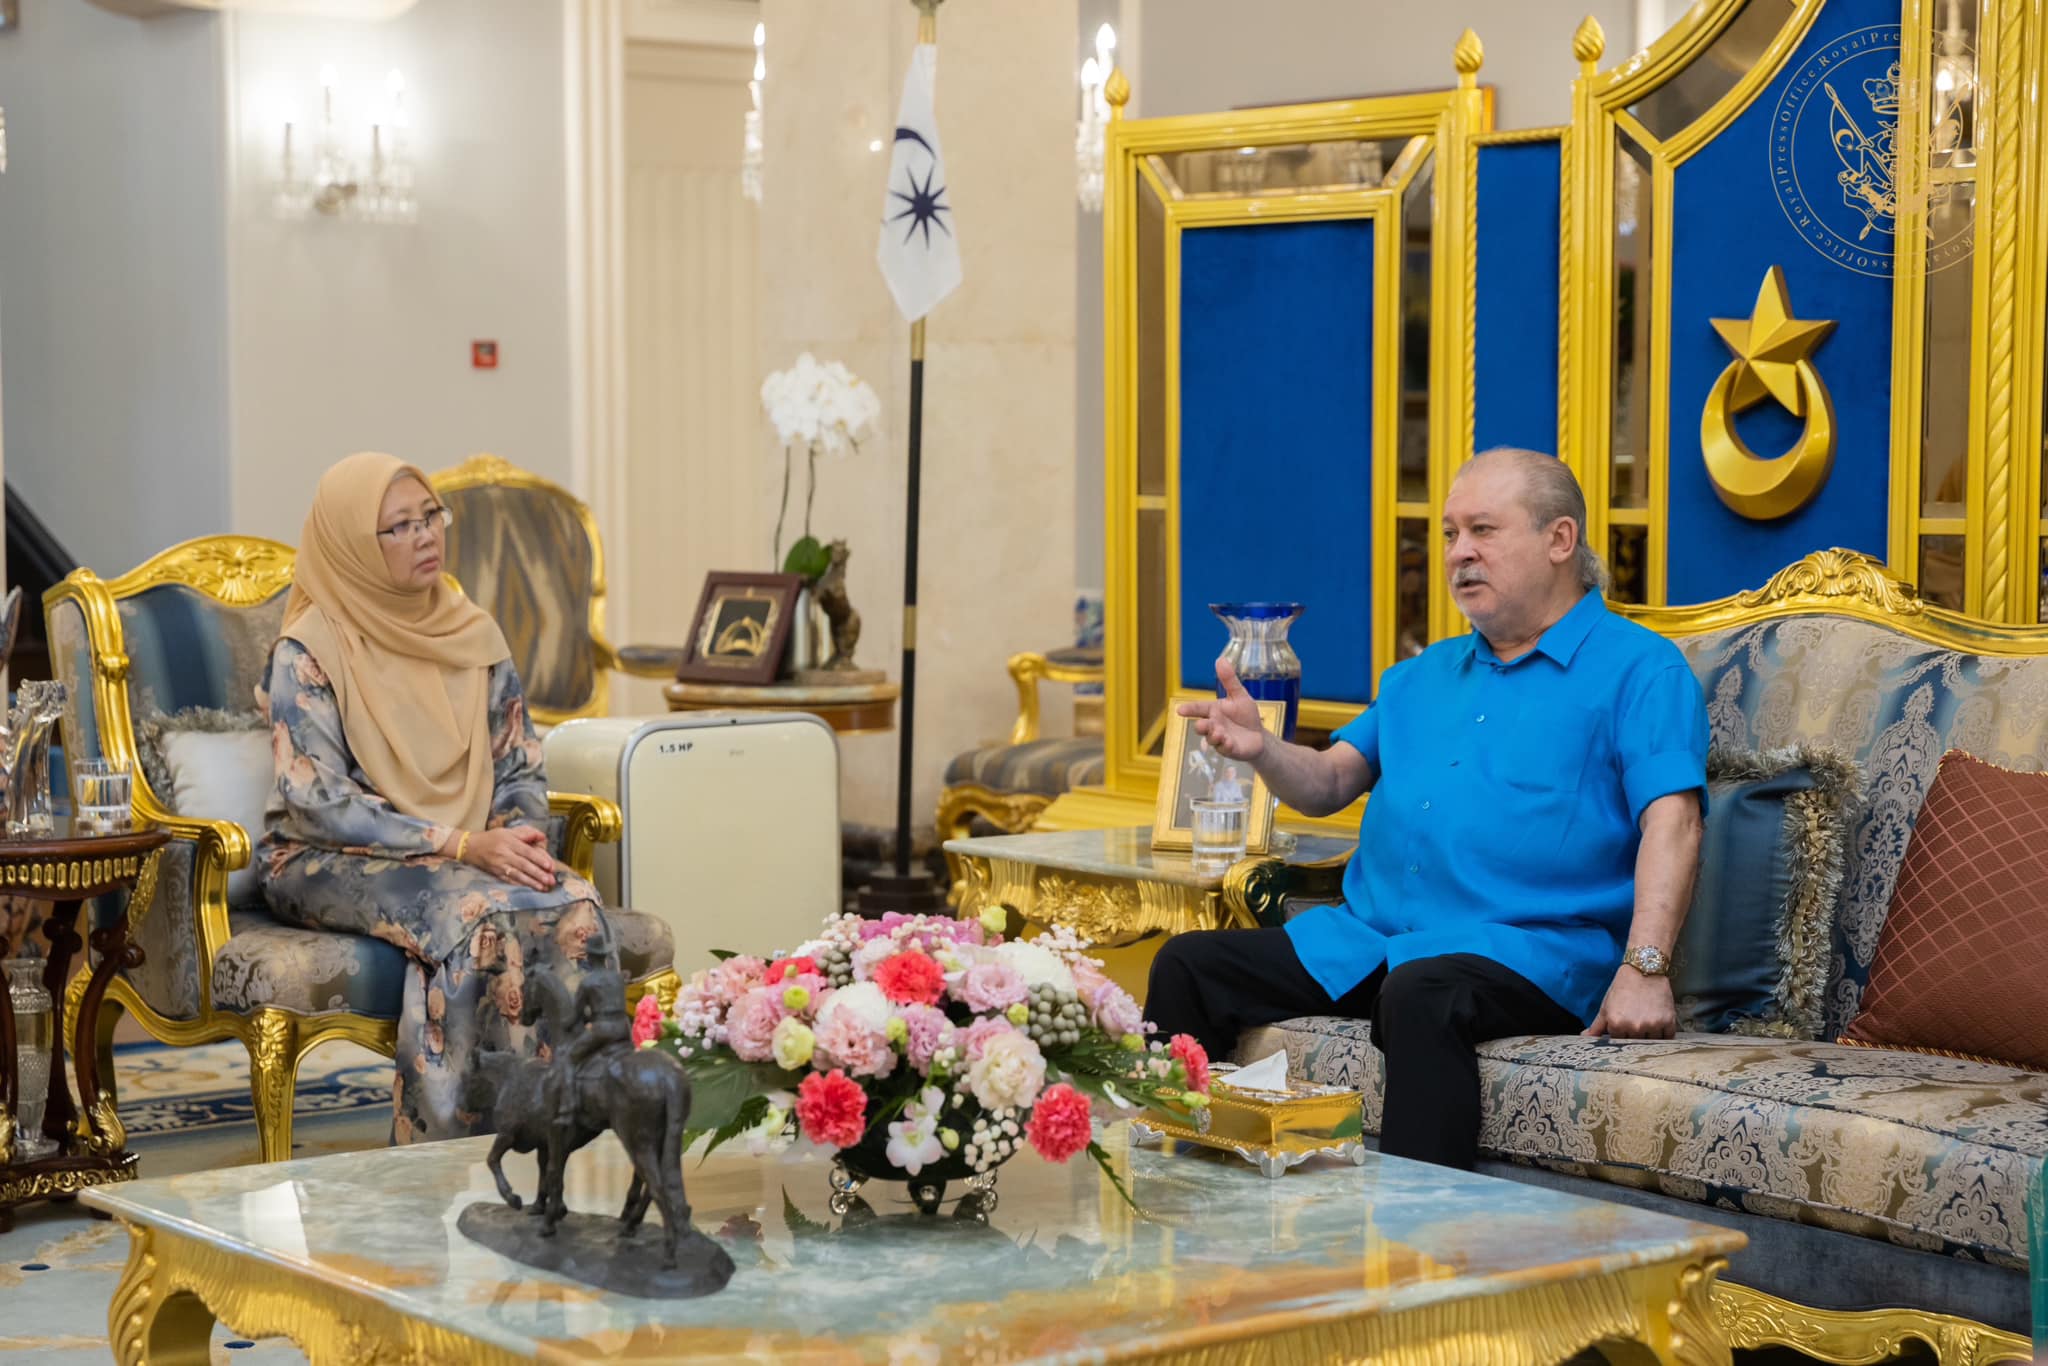 focus-on-quality-of-services,-facilities,-cleanliness-of-govt-hospitals-–-johor-ruler